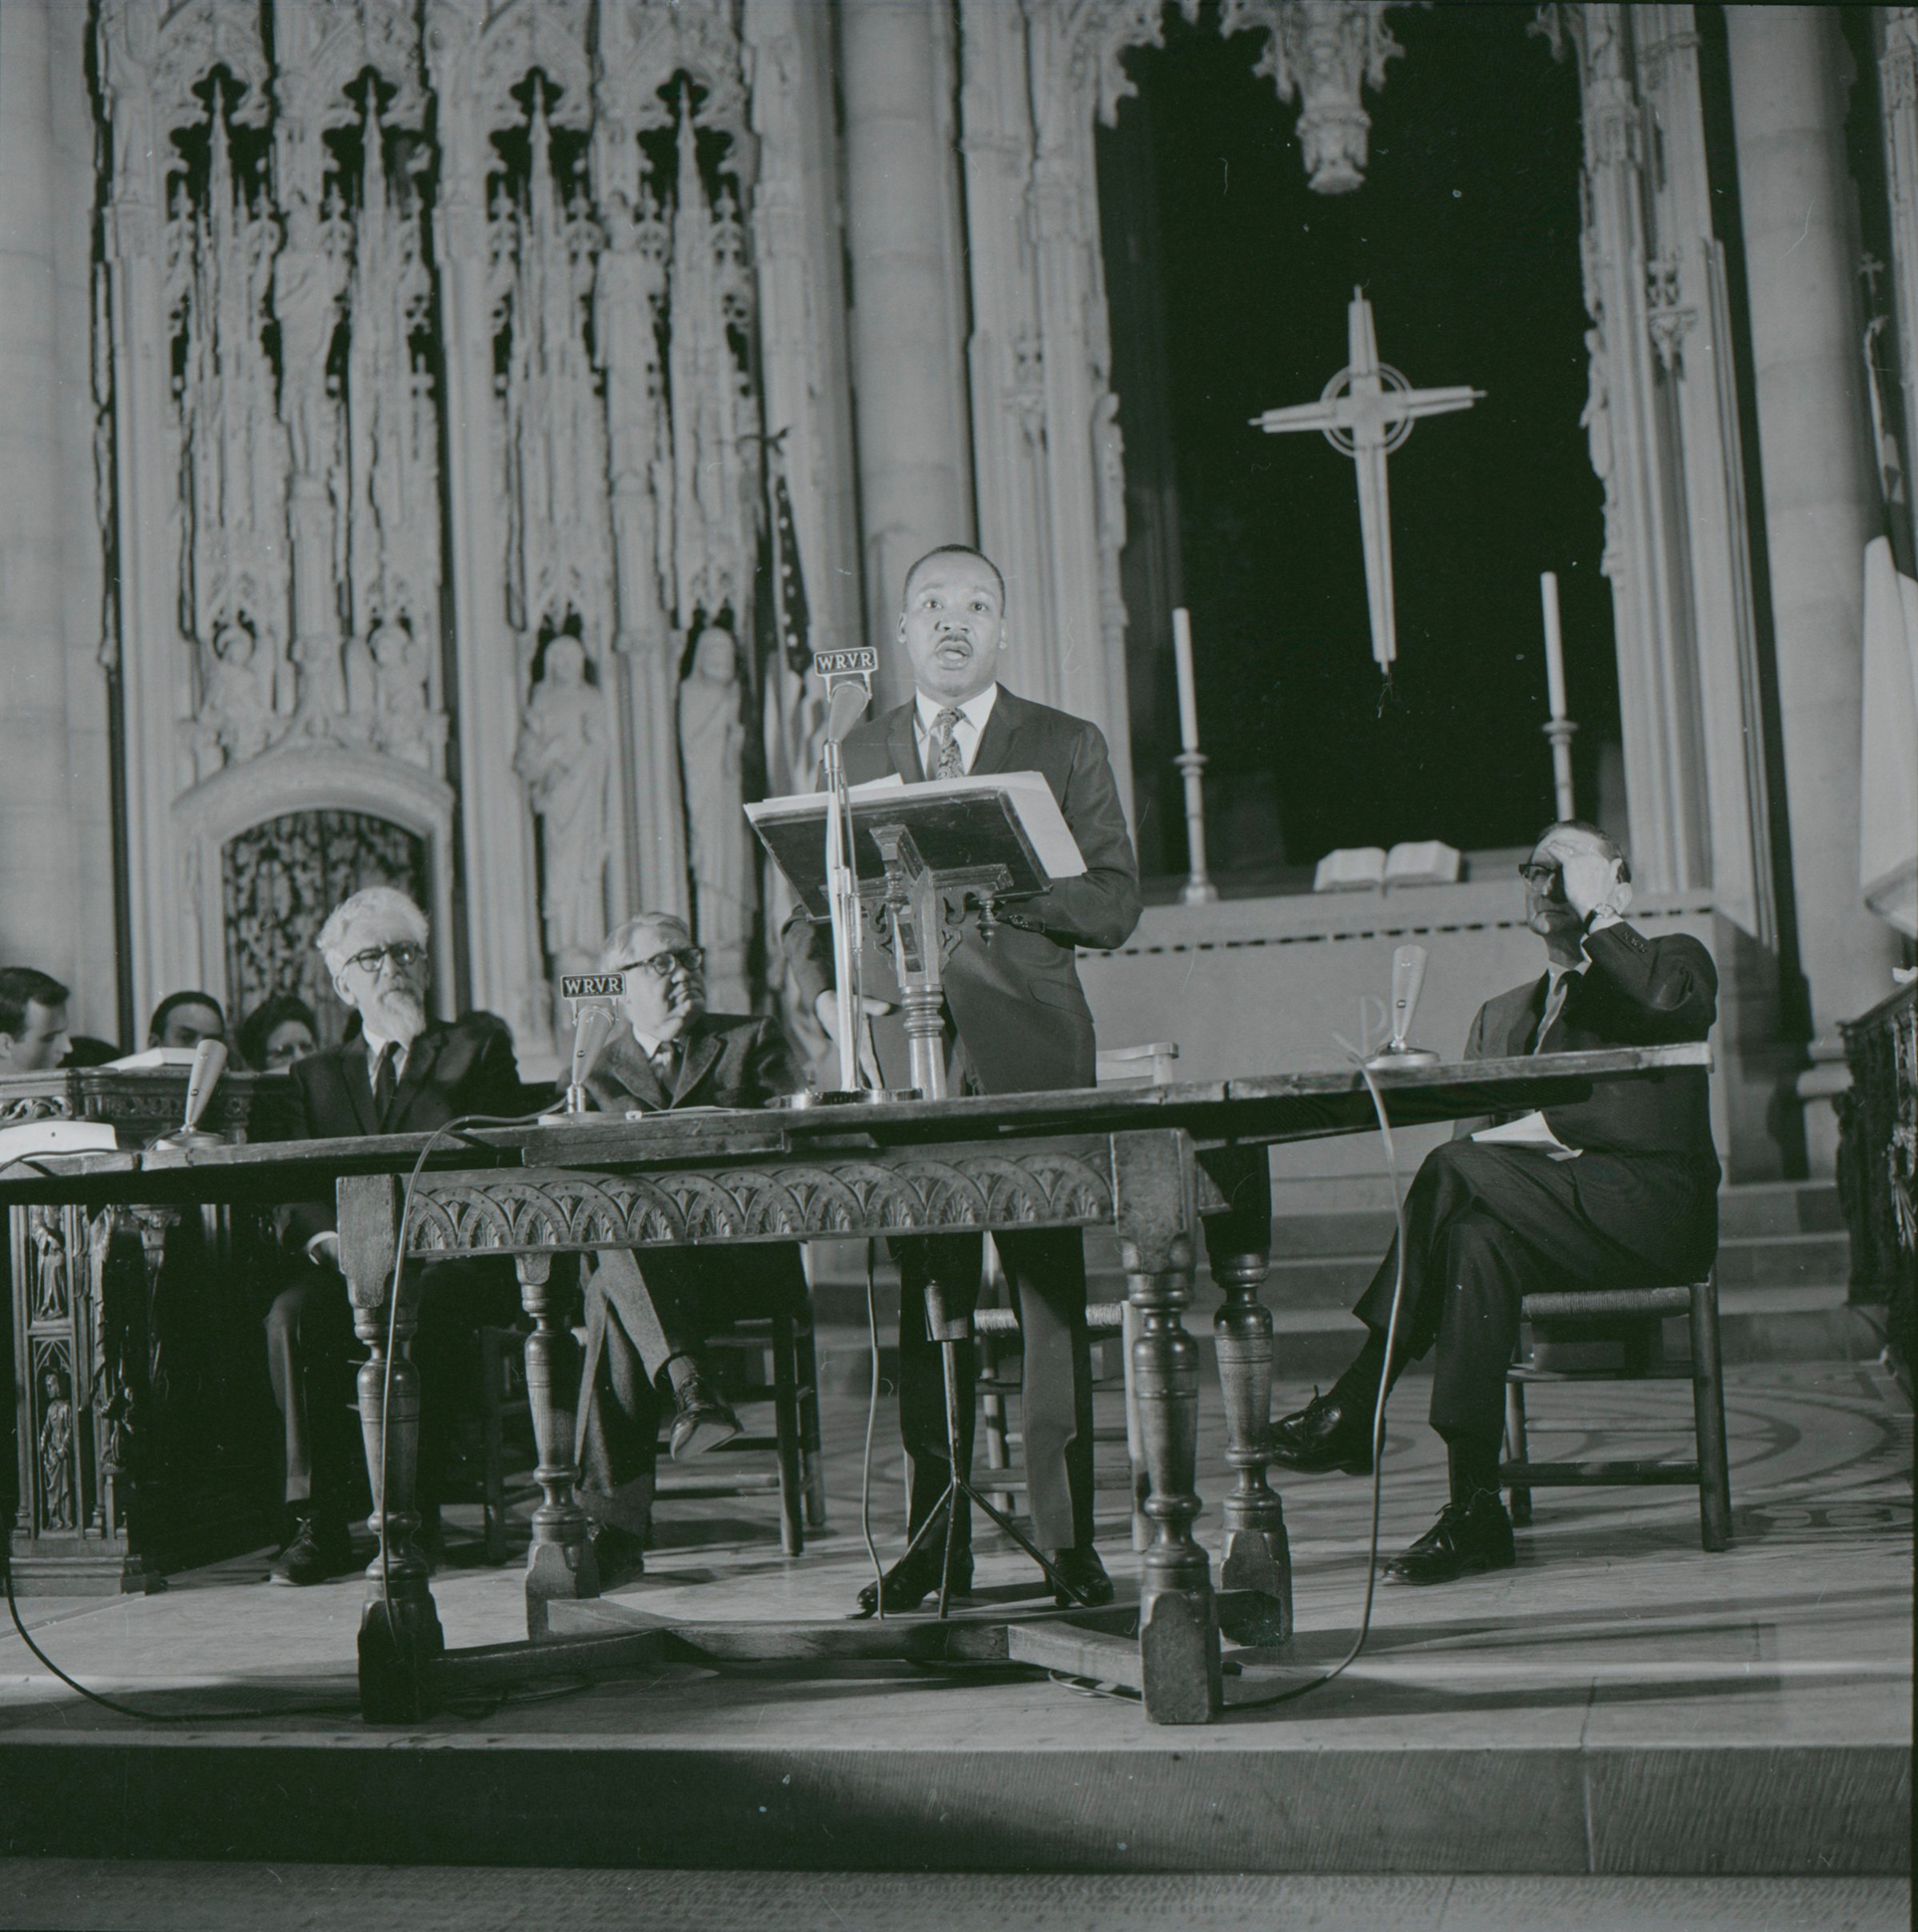 King delivering his speech “Beyond Vietnam” at New York City’s Riverside Church in 1967